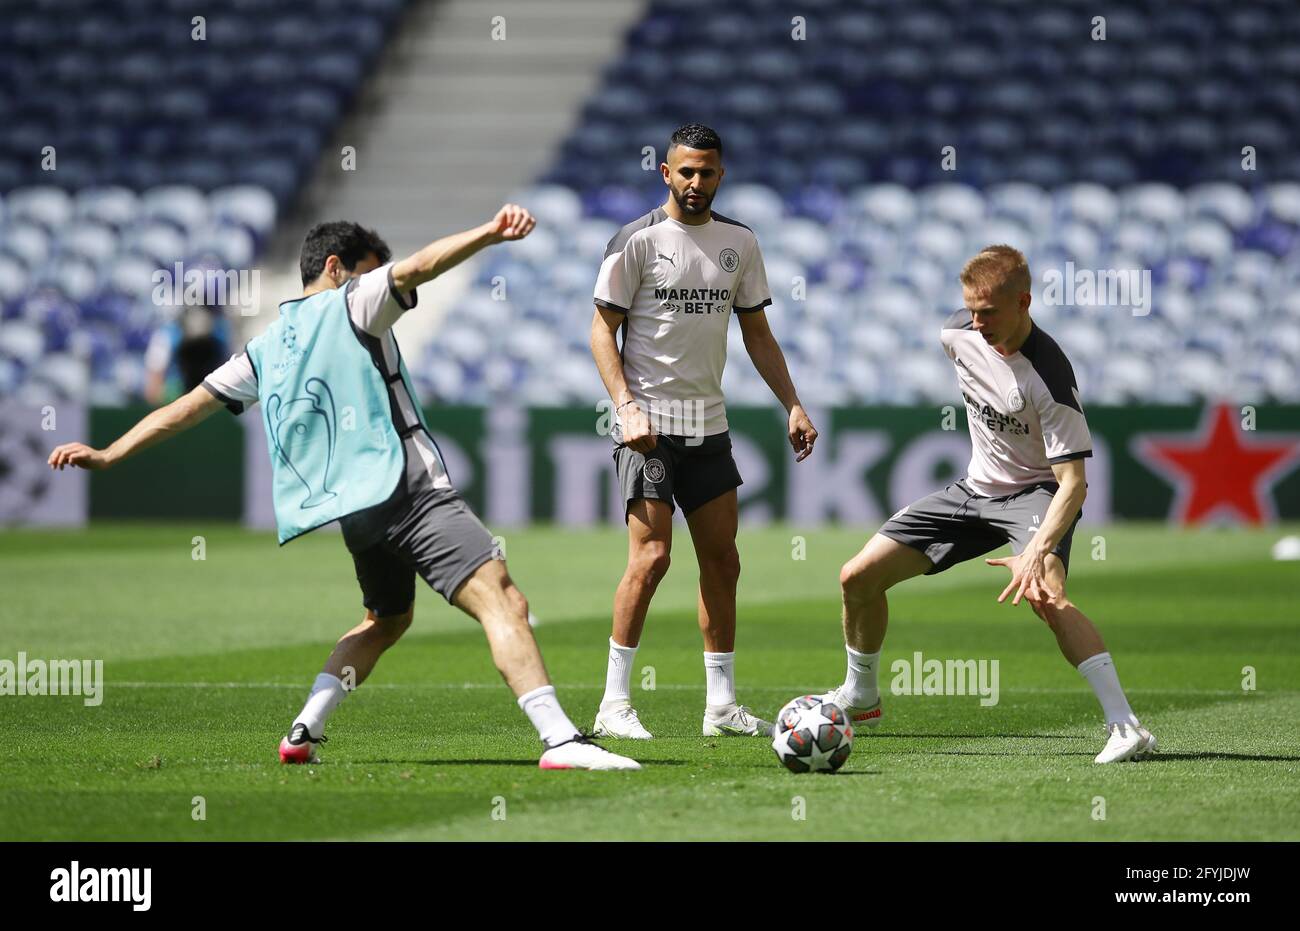 Porto, Portugal. 28th May, 2021. Riyad Marhez (c) looks on as Oleksandr Zinchenko of Manchester City (R) blocks a pass during their training session at the Estadio do Dragao, Porto. Picture credit should read: David Klein/Sportimage Credit: Sportimage/Alamy Live News Stock Photo